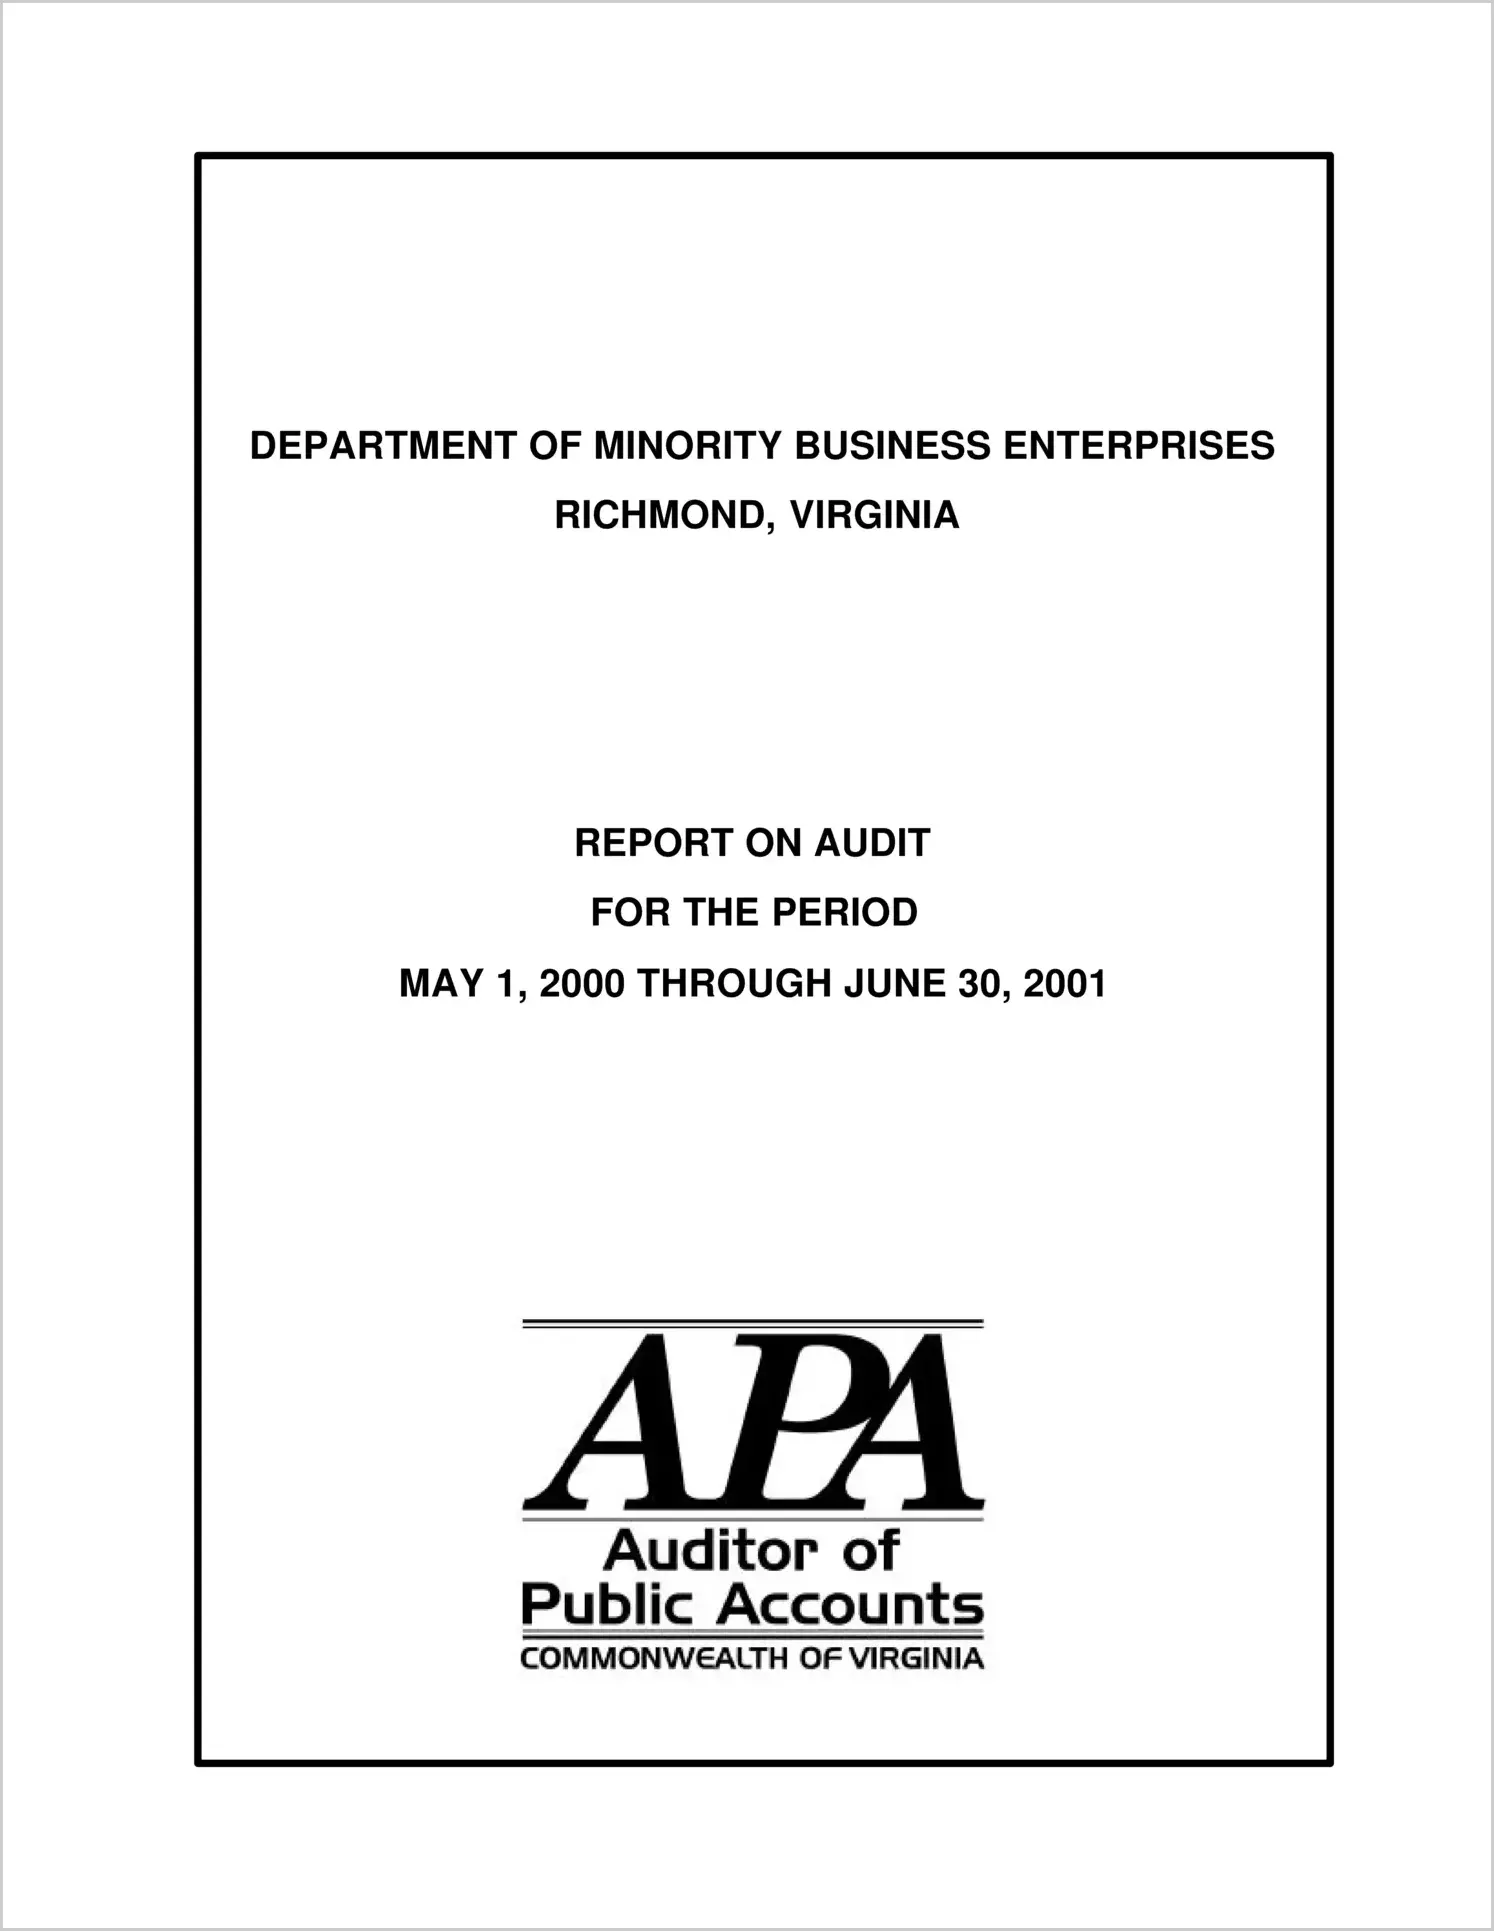 Department of Minority Business Enterprise for the period May 1, 2000 through June 30, 2001